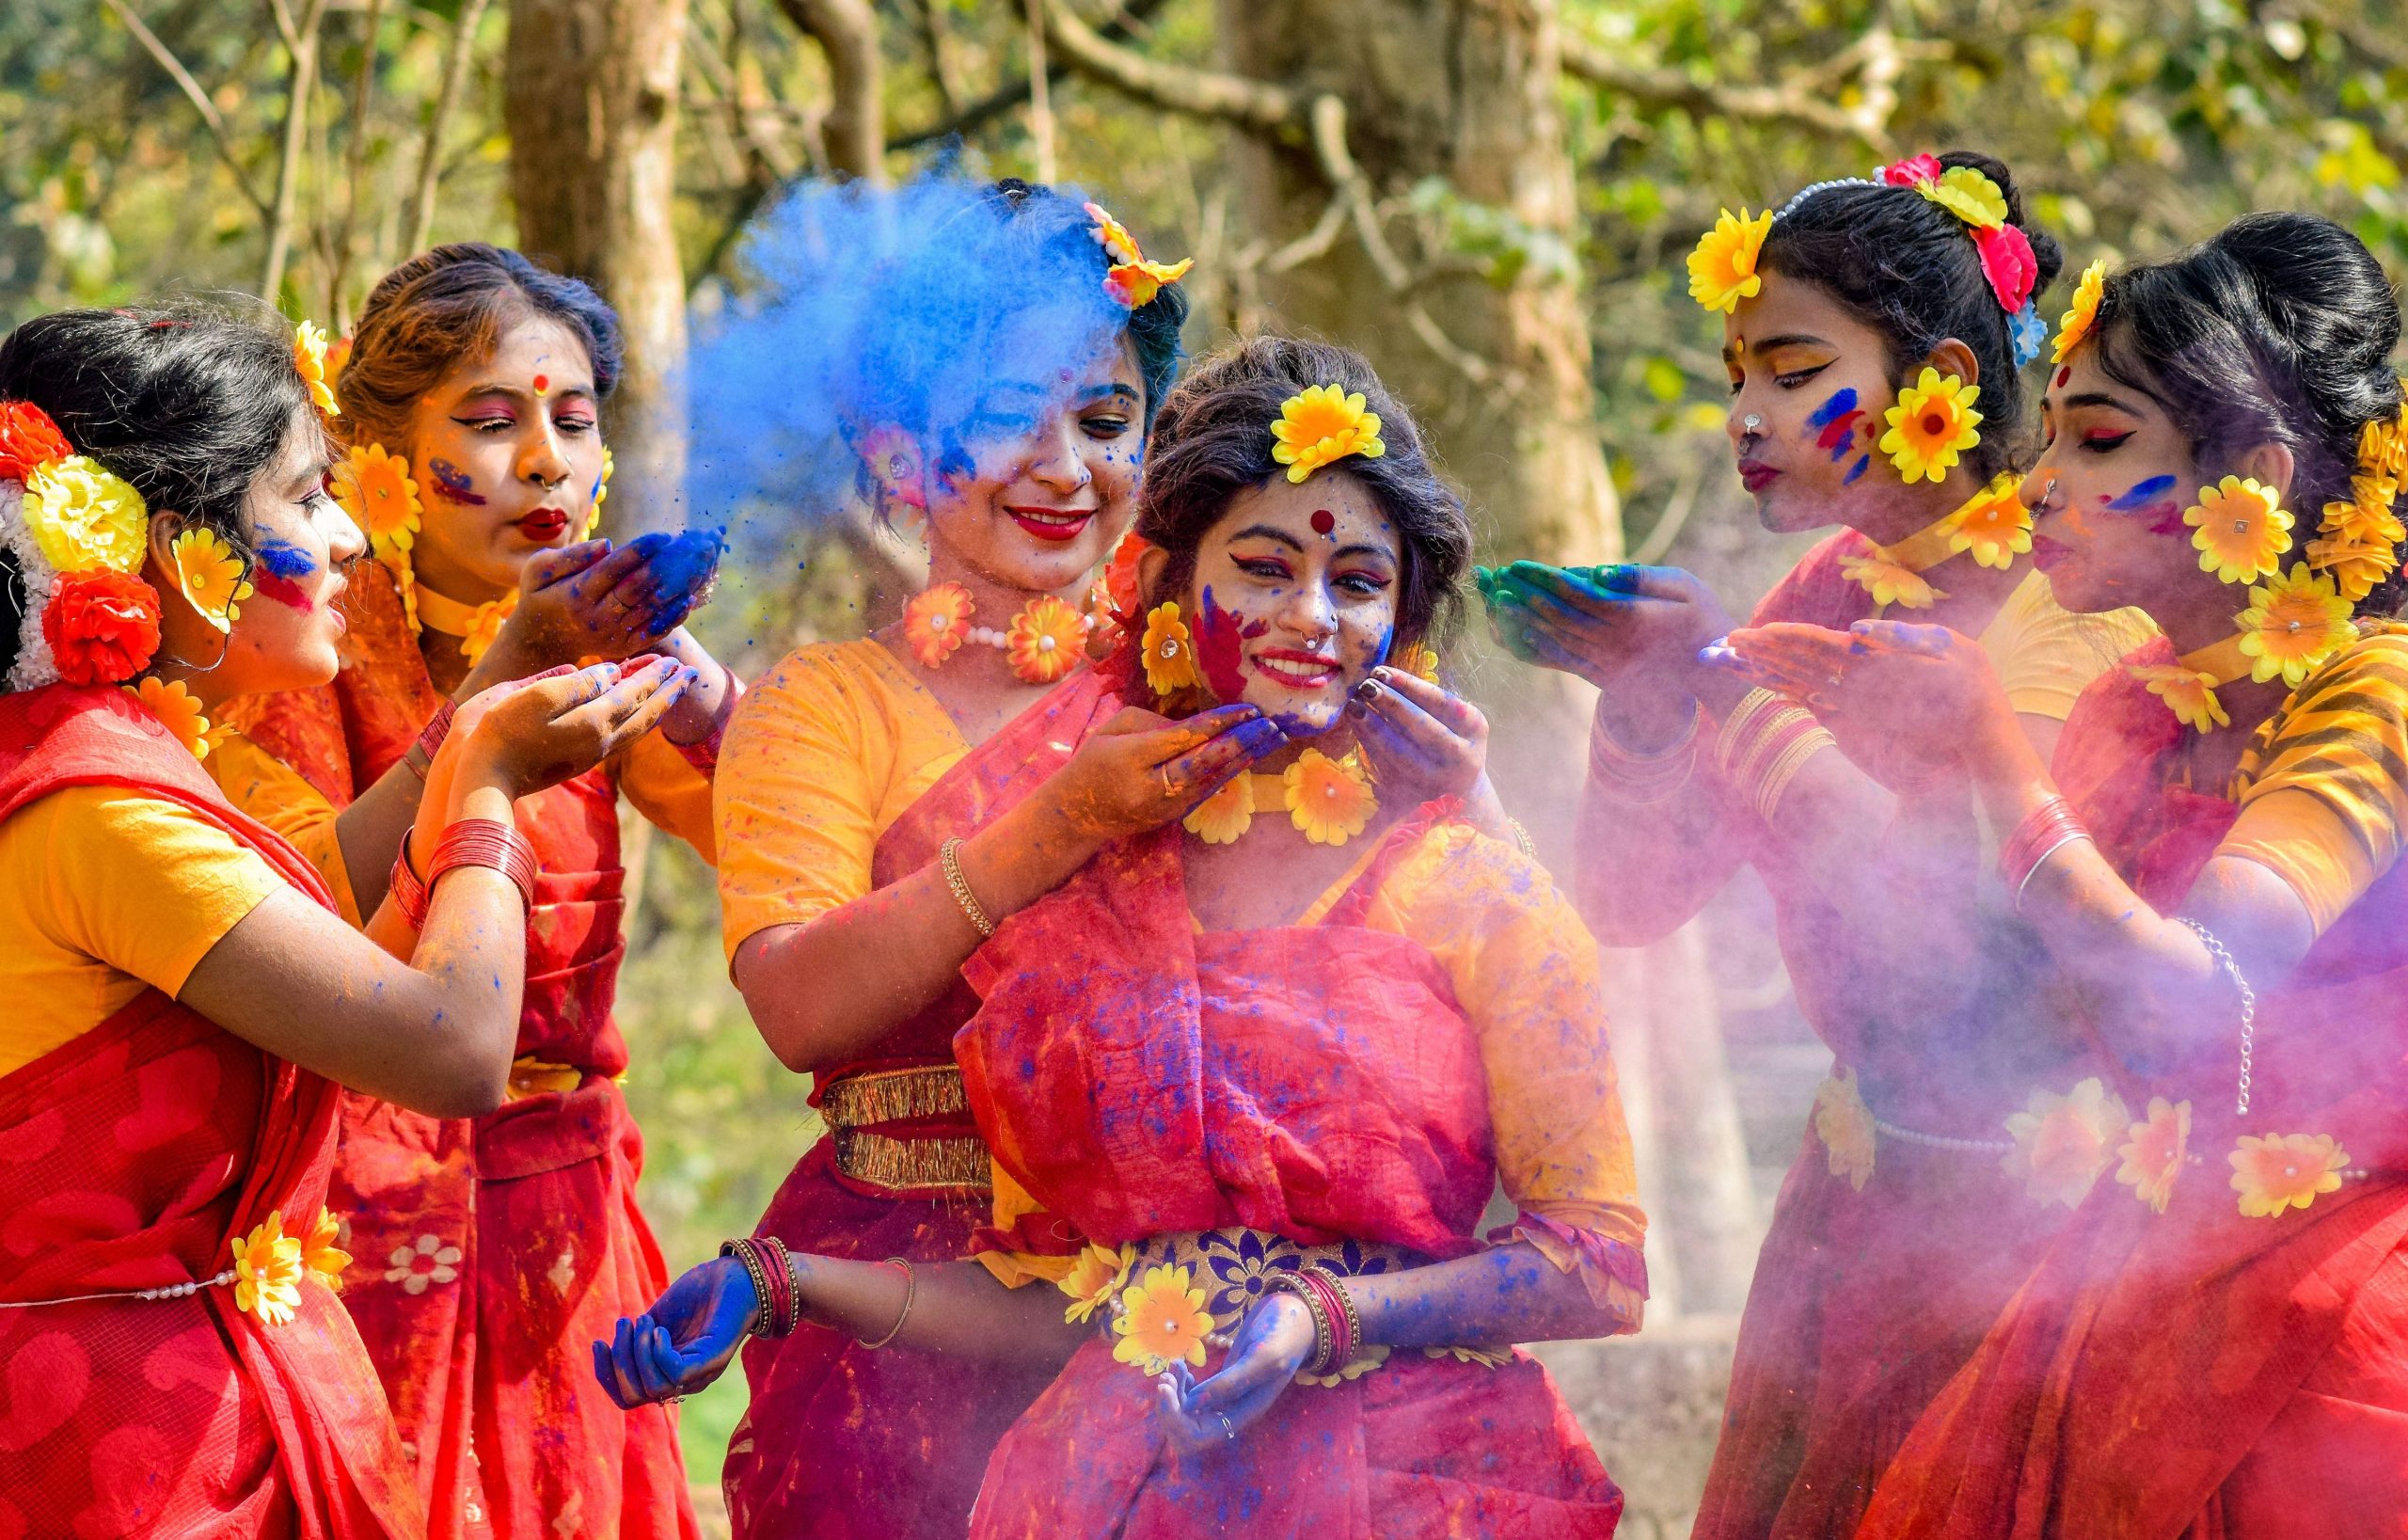 COVID-19 guidelines and tips for safe Holi celebrations